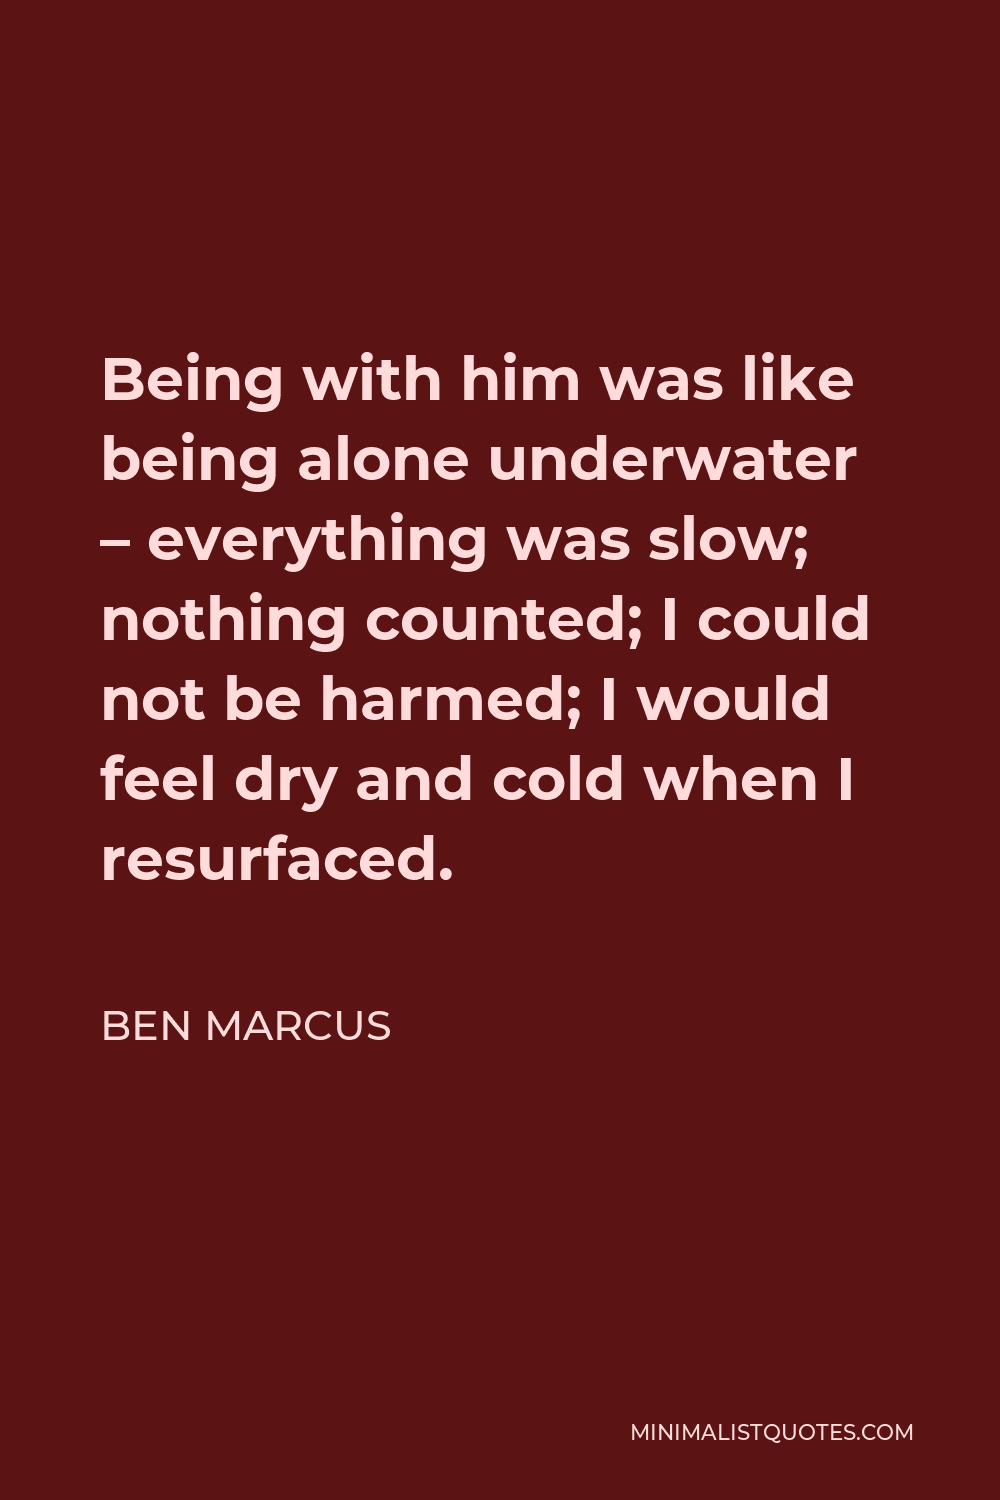 Ben Marcus Quote - Being with him was like being alone underwater – everything was slow; nothing counted; I could not be harmed; I would feel dry and cold when I resurfaced.